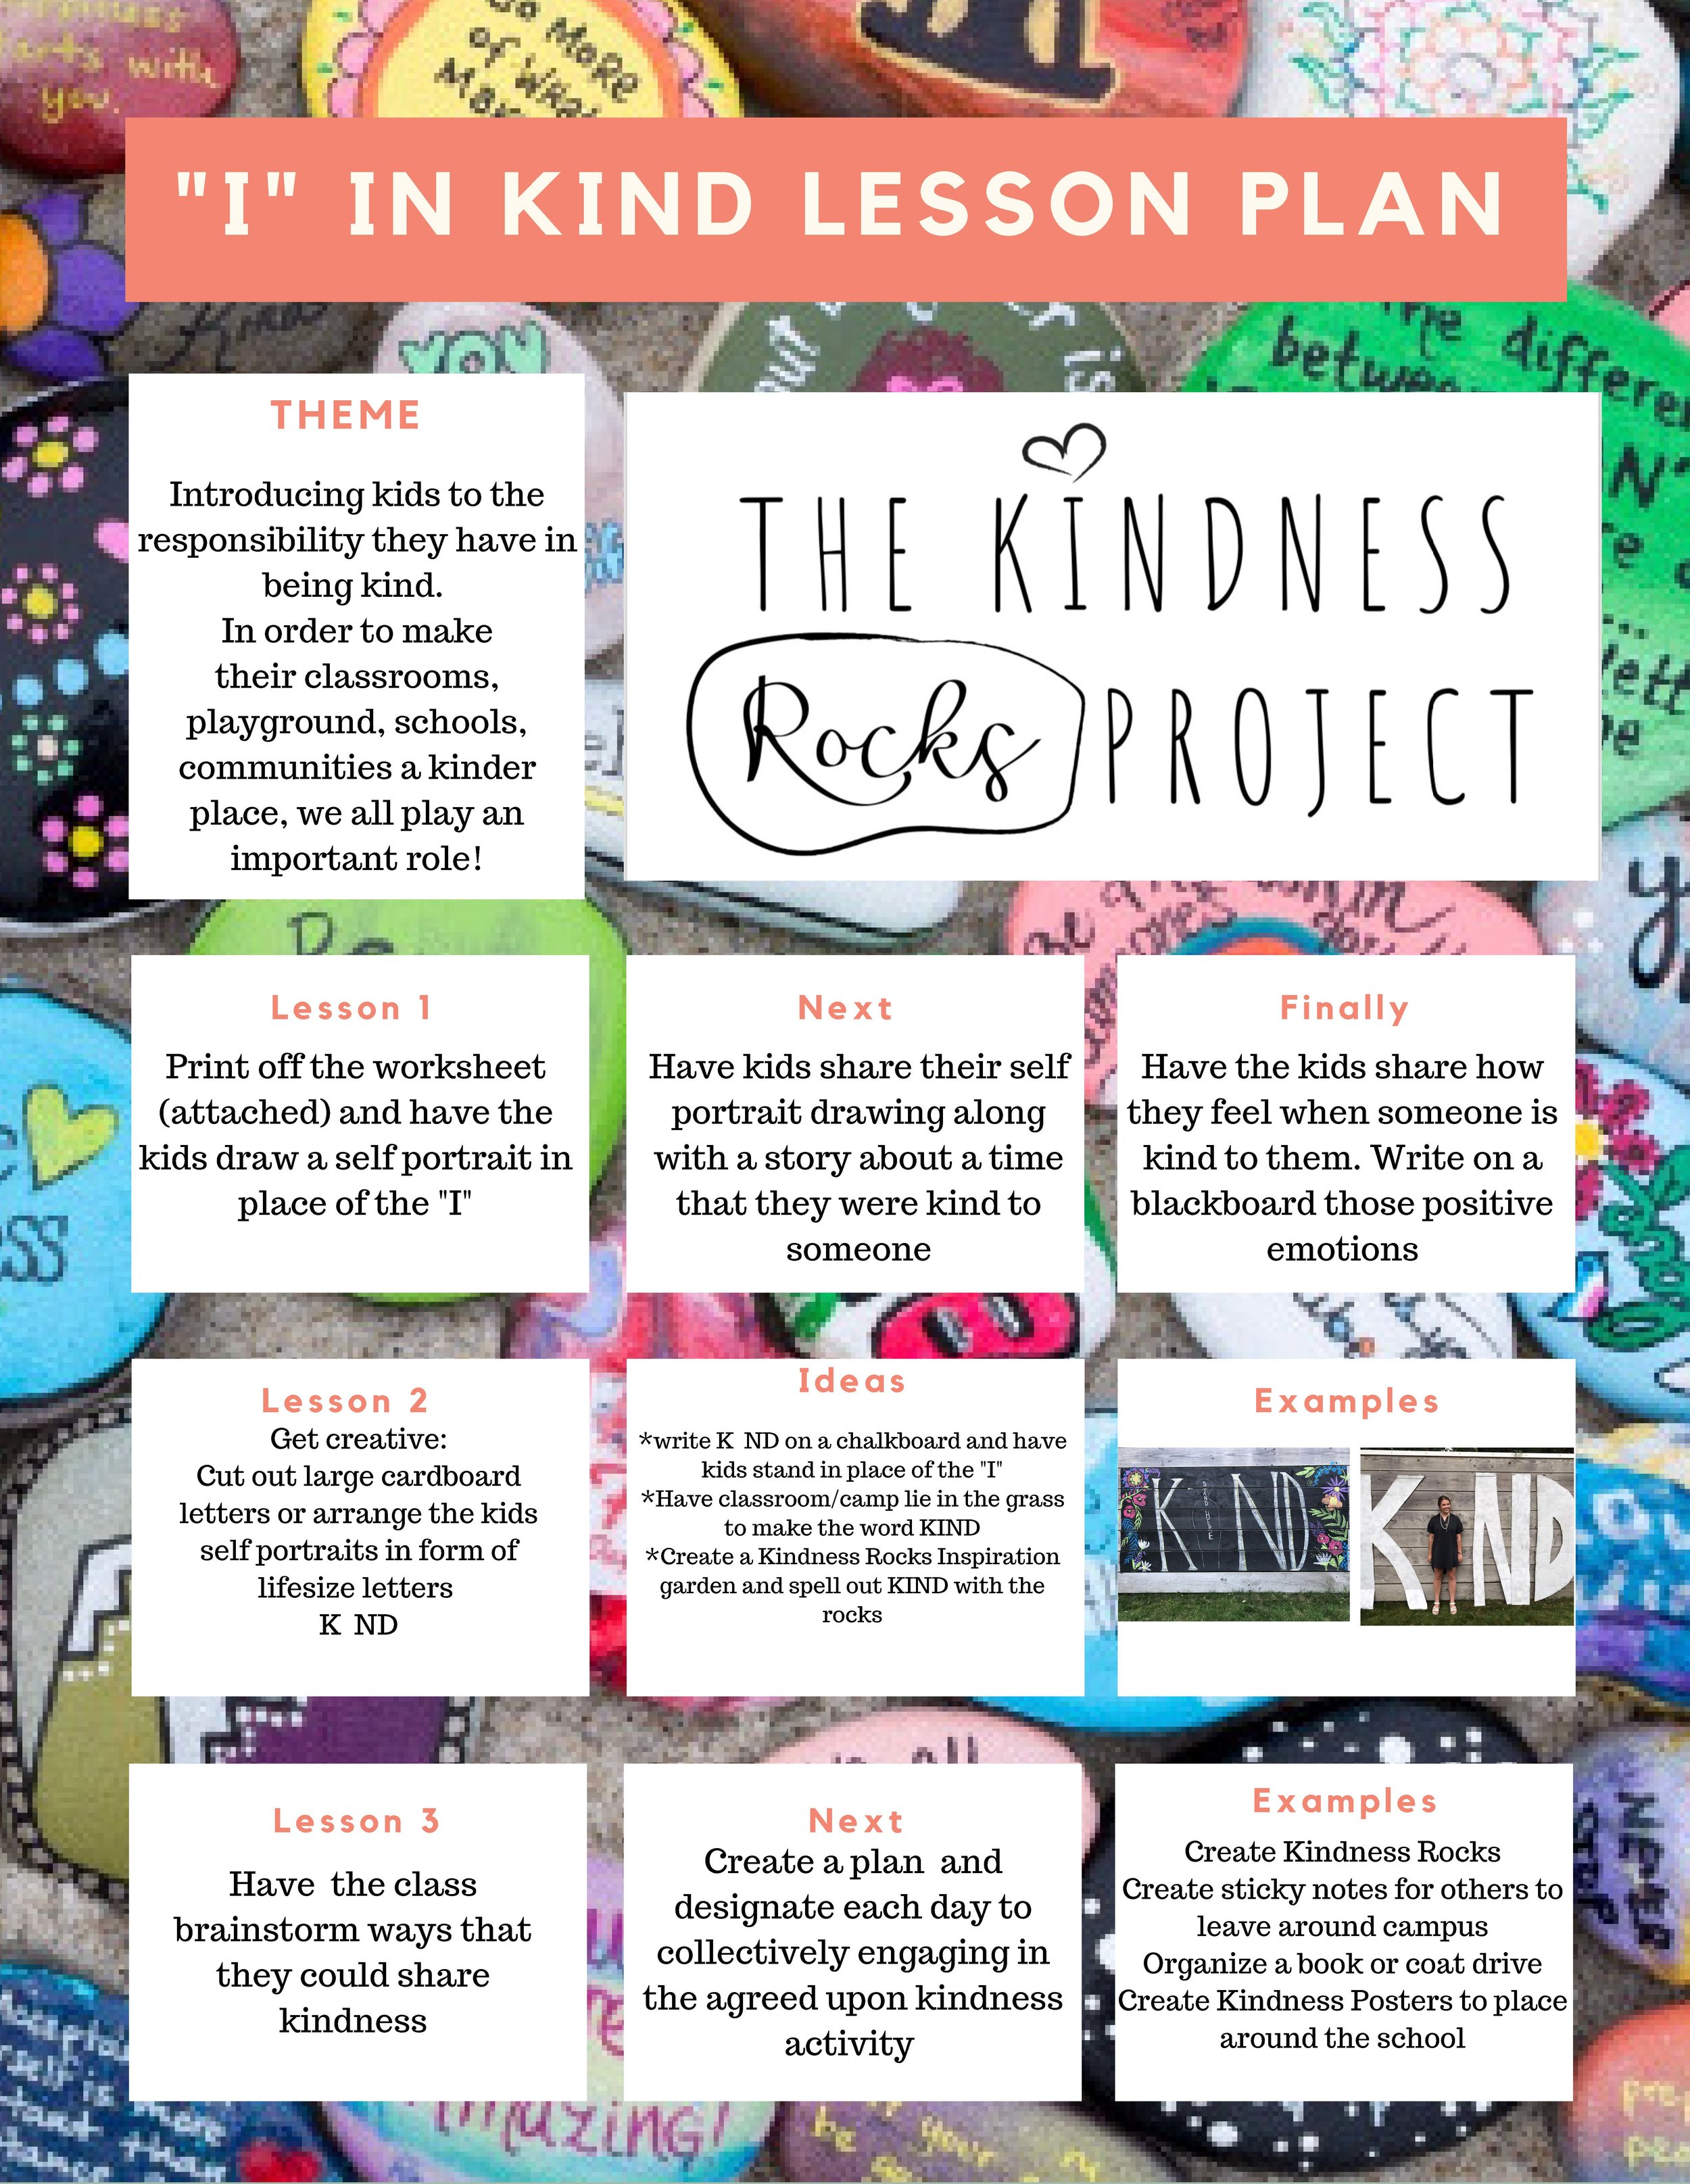 Free Downloads The Kindness Rocks Project